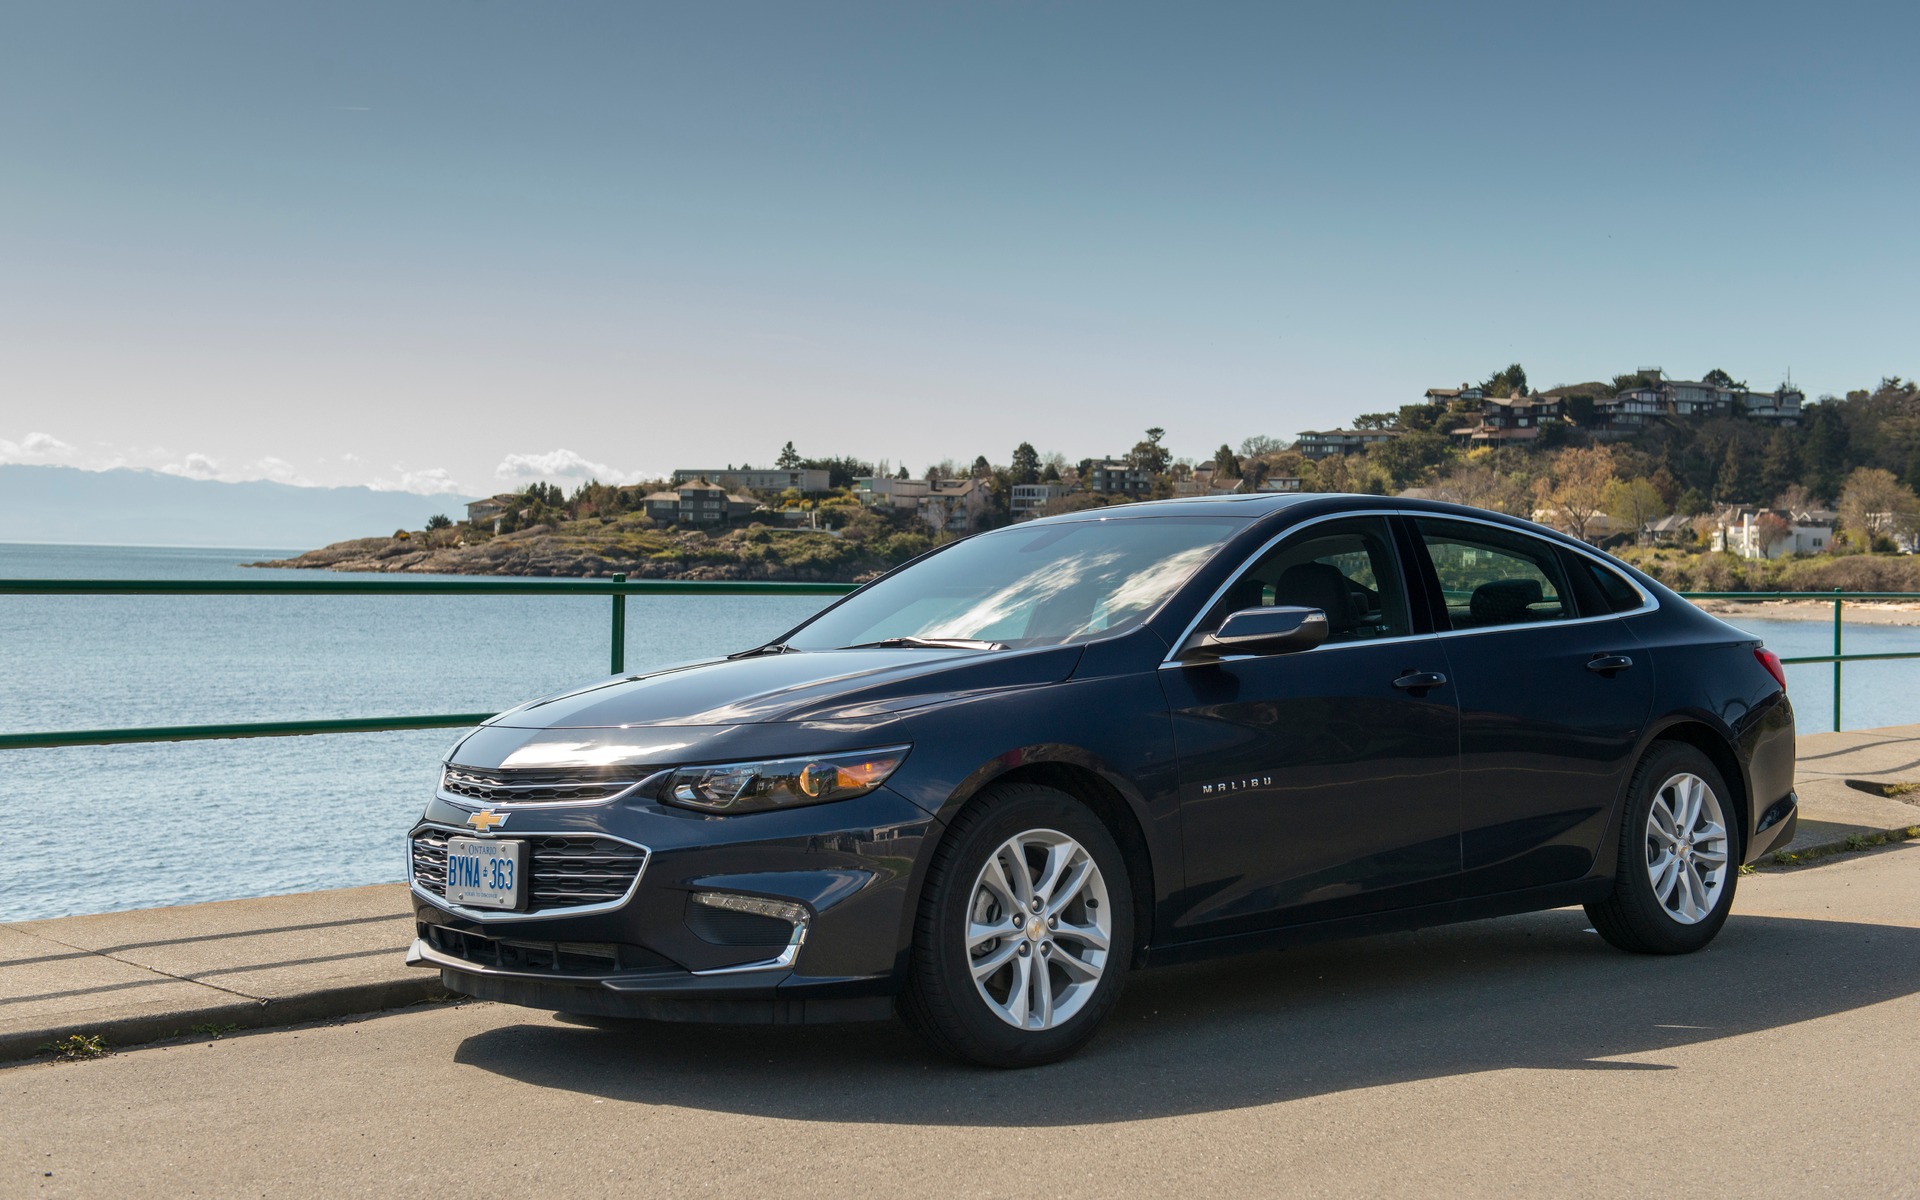 2017 Chevrolet Malibu - News, reviews, picture galleries and videos - The  Car Guide